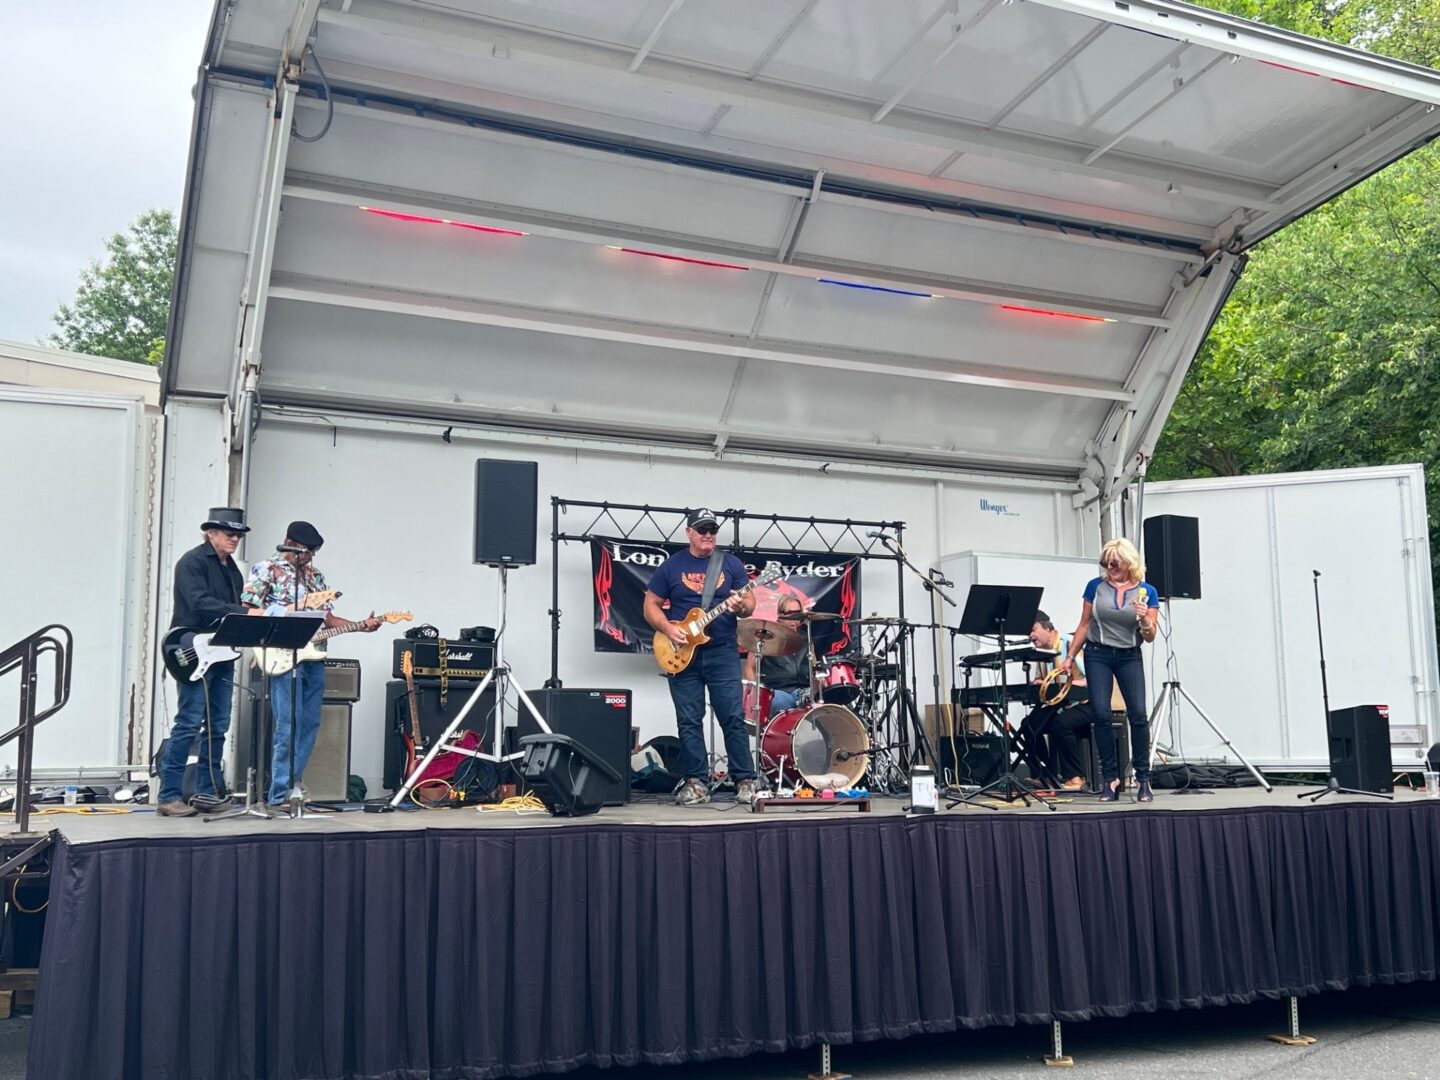 A band performing on stage under a tent.